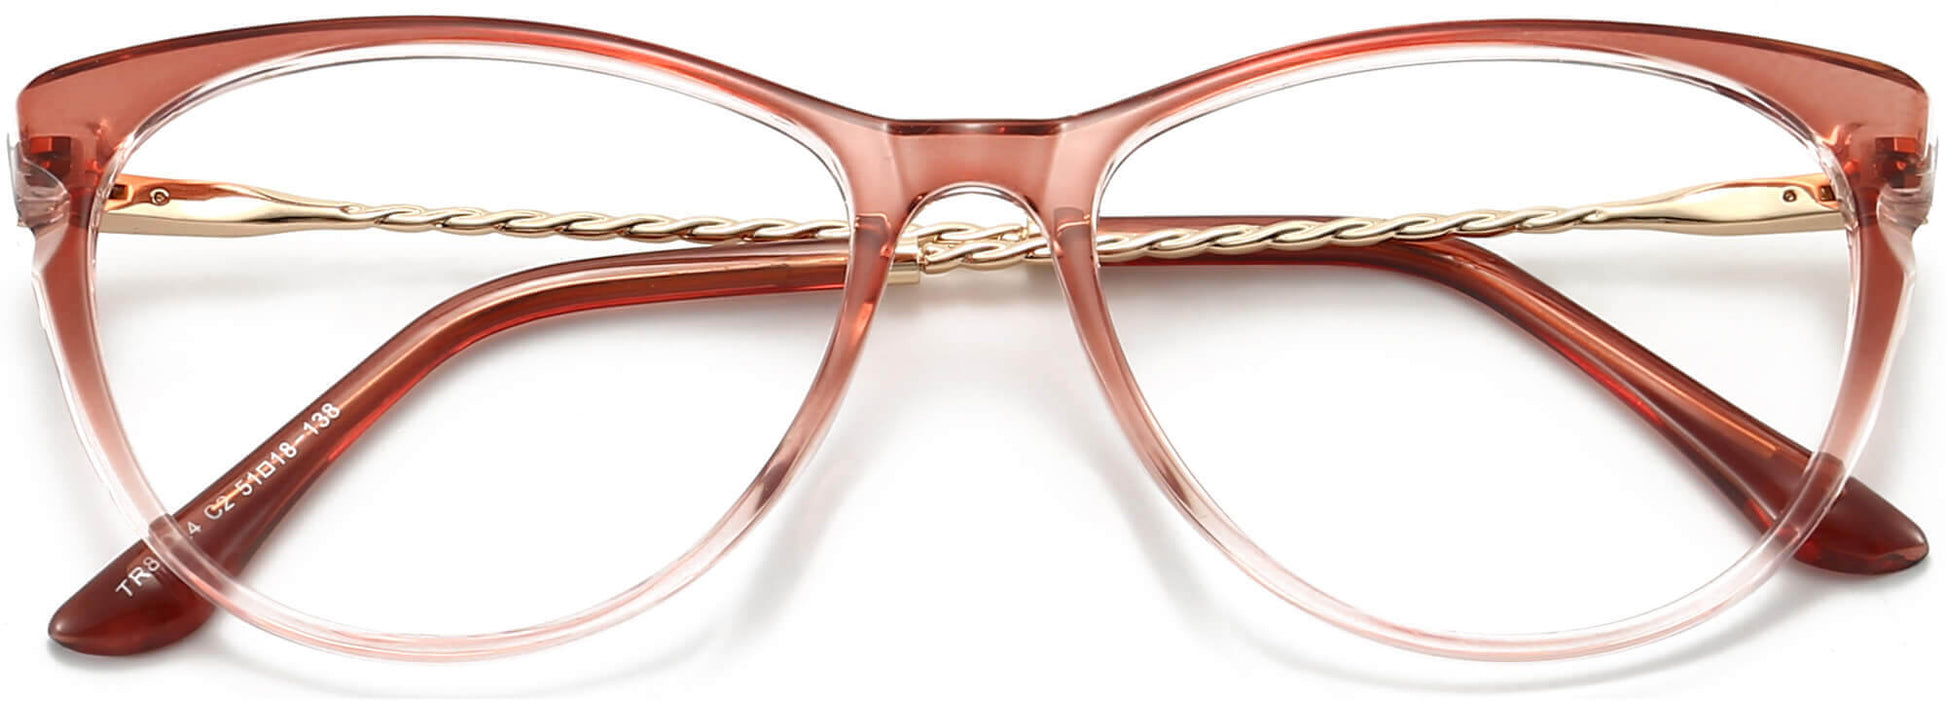 Susanna Cateye Pink Eyeglasses from ANRRI, closed view